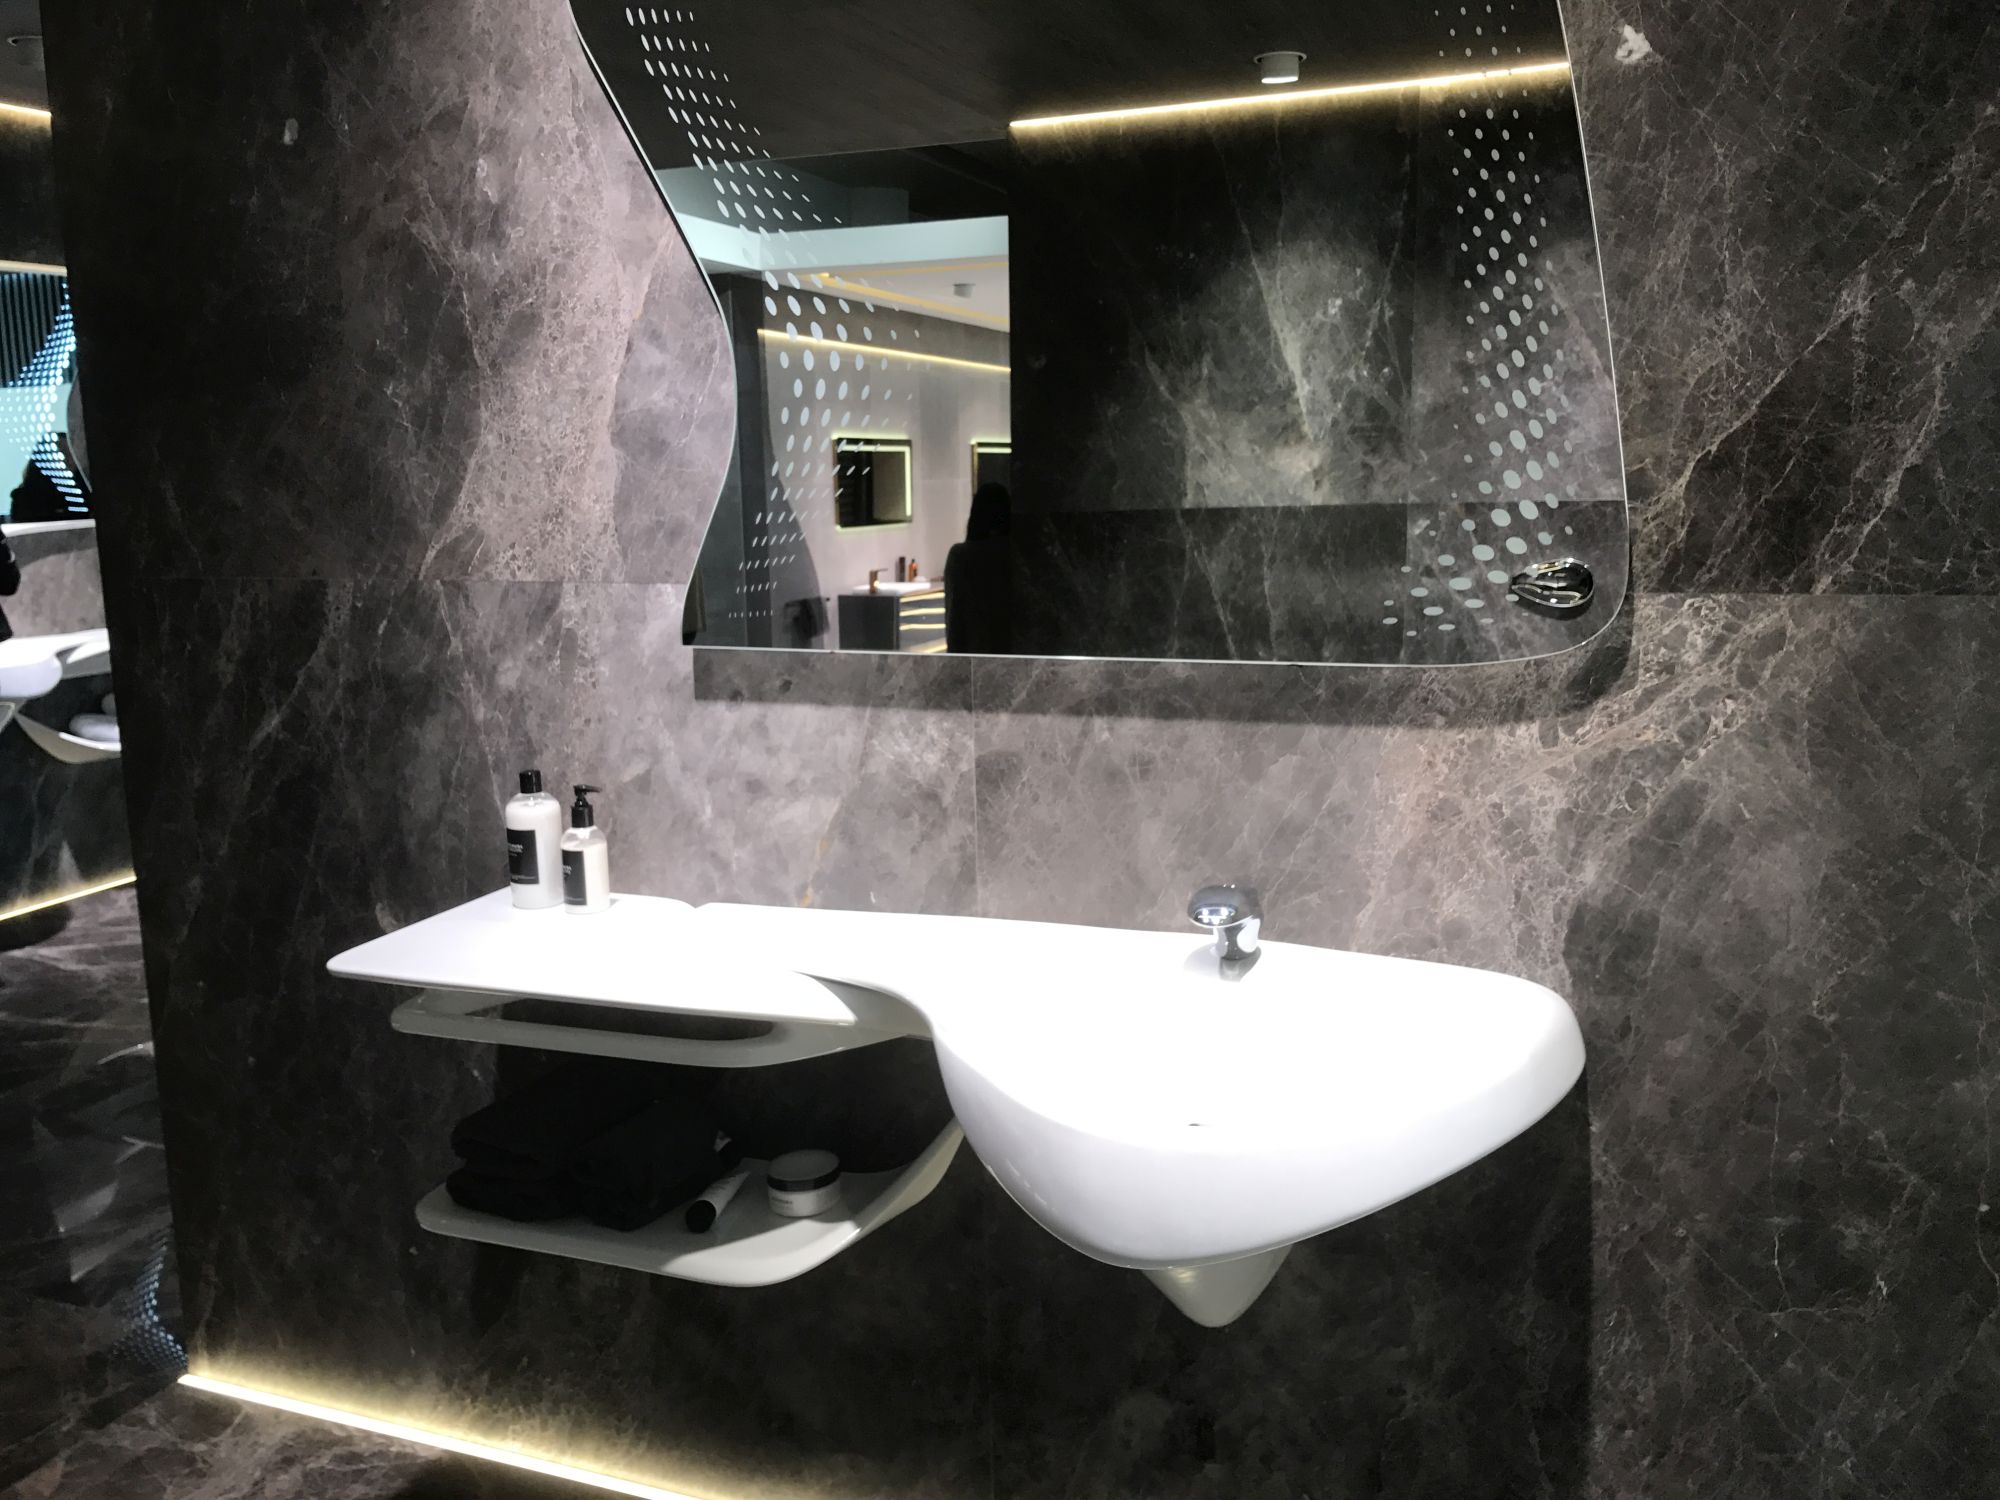 VITAE collection by Zaha Hadid, for Porcelanosa